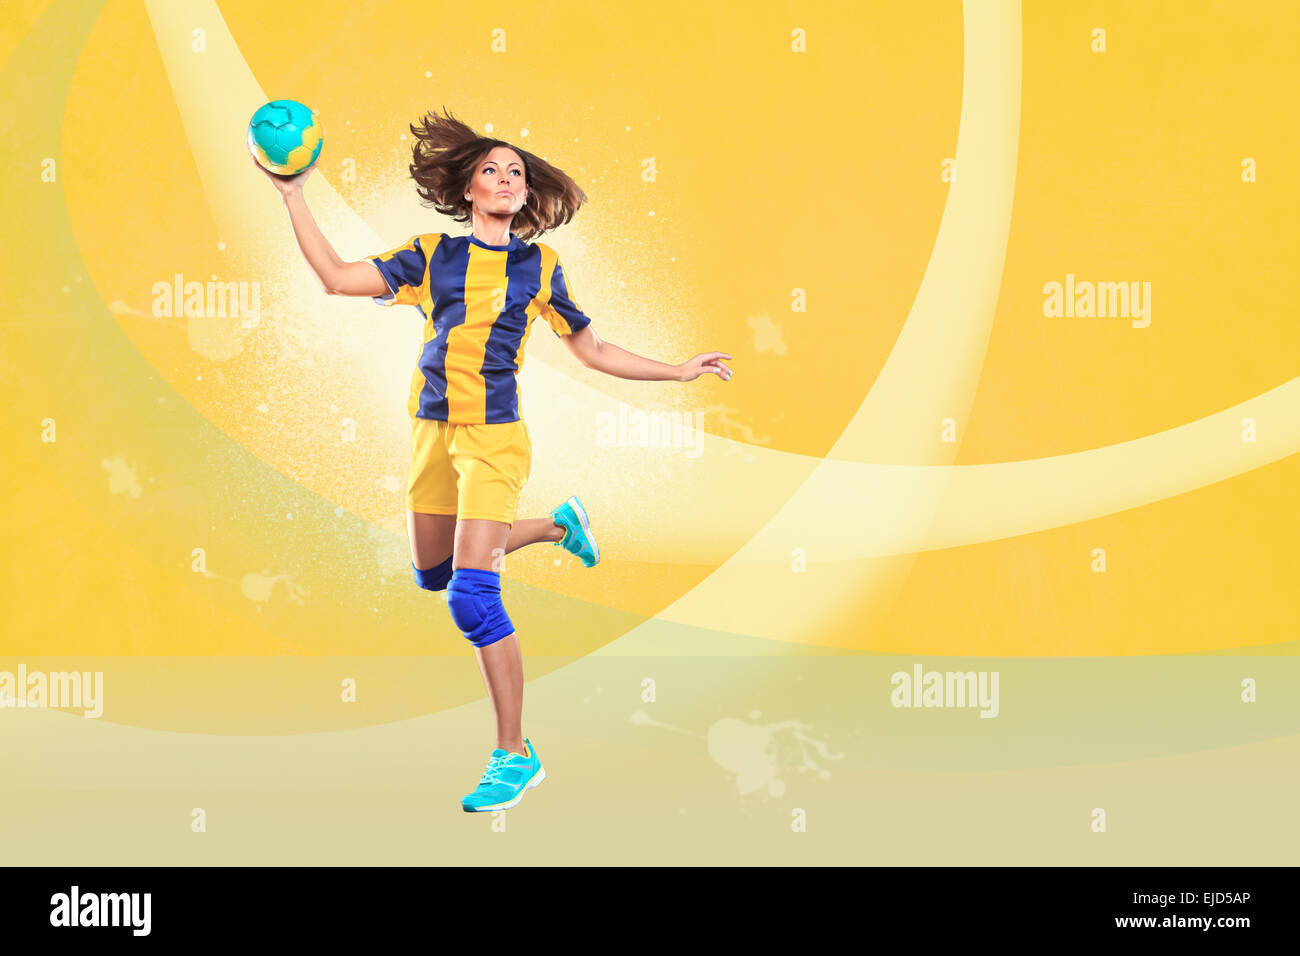 female handball player with a ball on the field Stock Photo